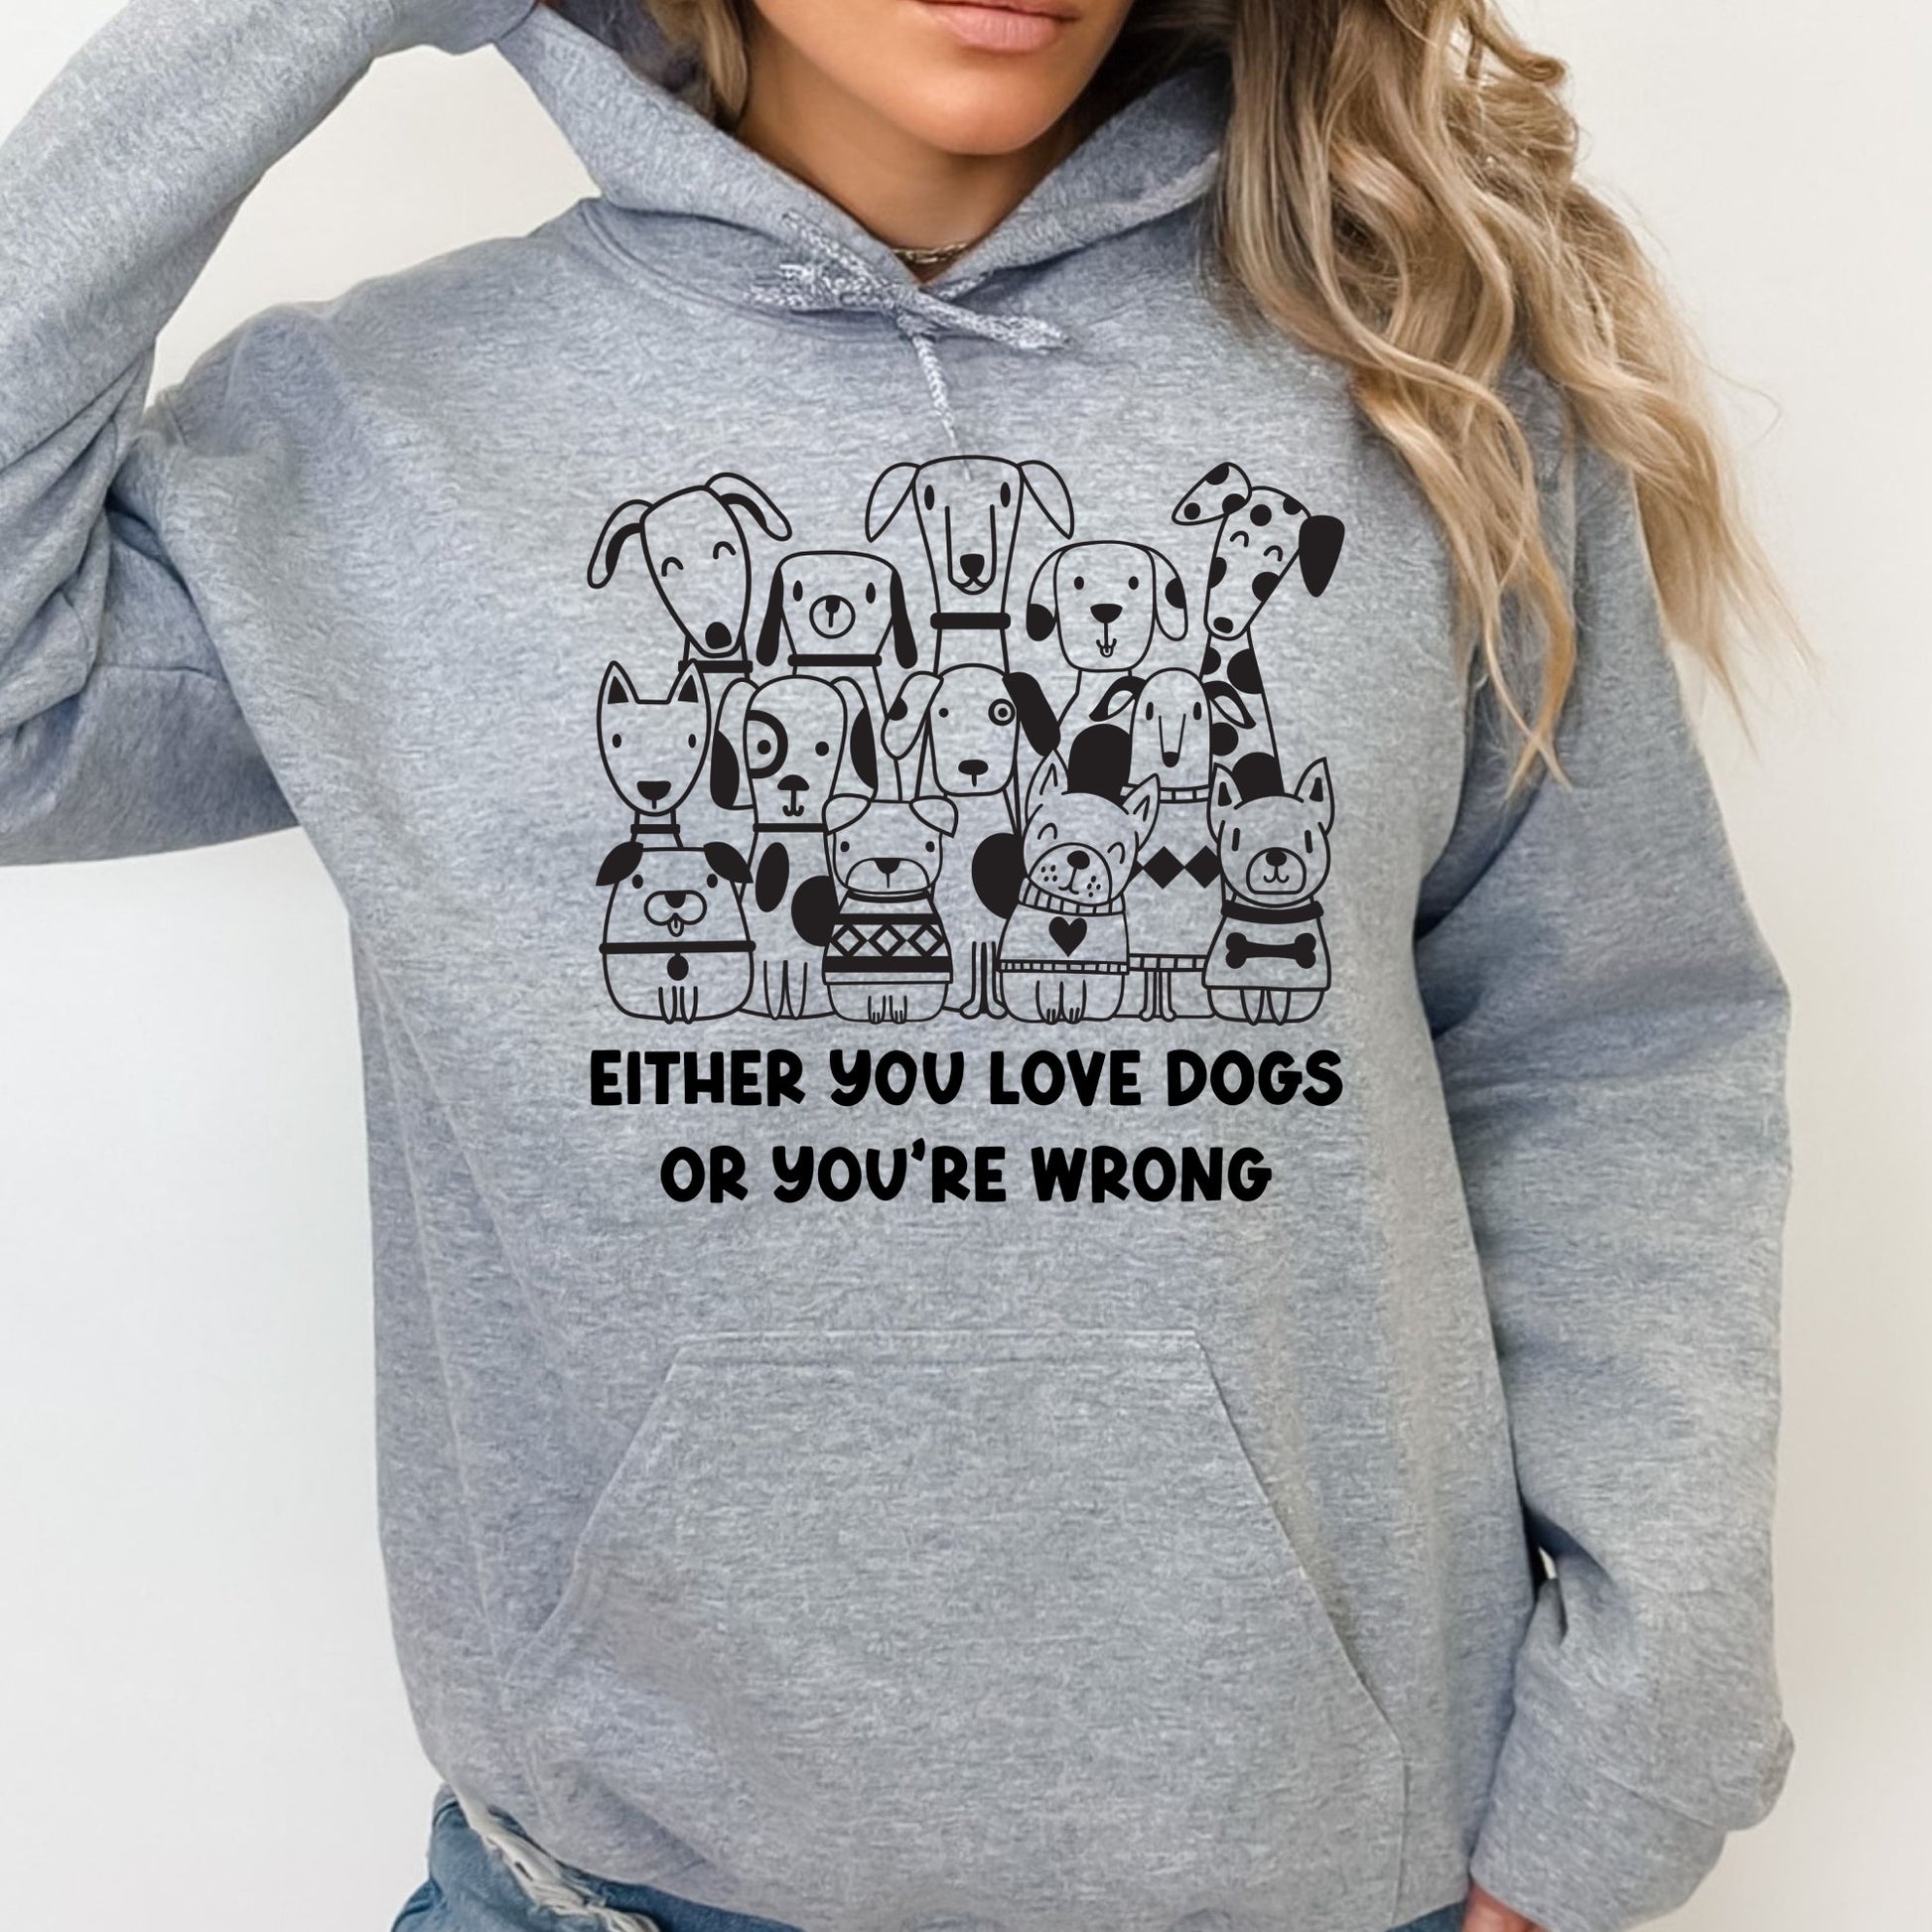 Either You Love Dogs or You're Wrong Hooded Sweatshirt - PuppyJo Sweatshirt S / Sport Grey